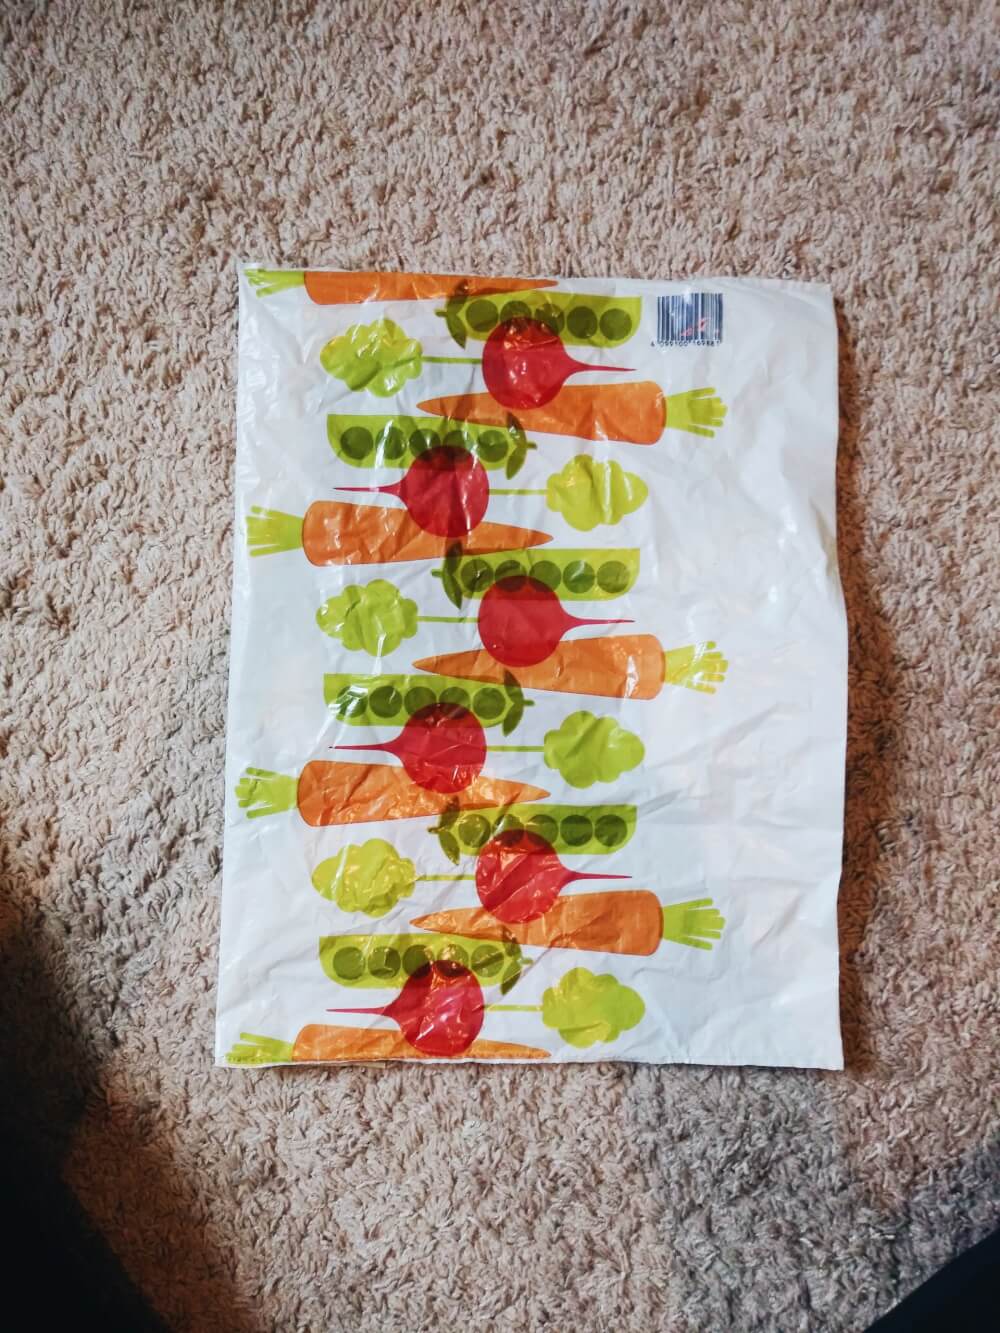 Aldi grocery bag flipped over, green bar facing down